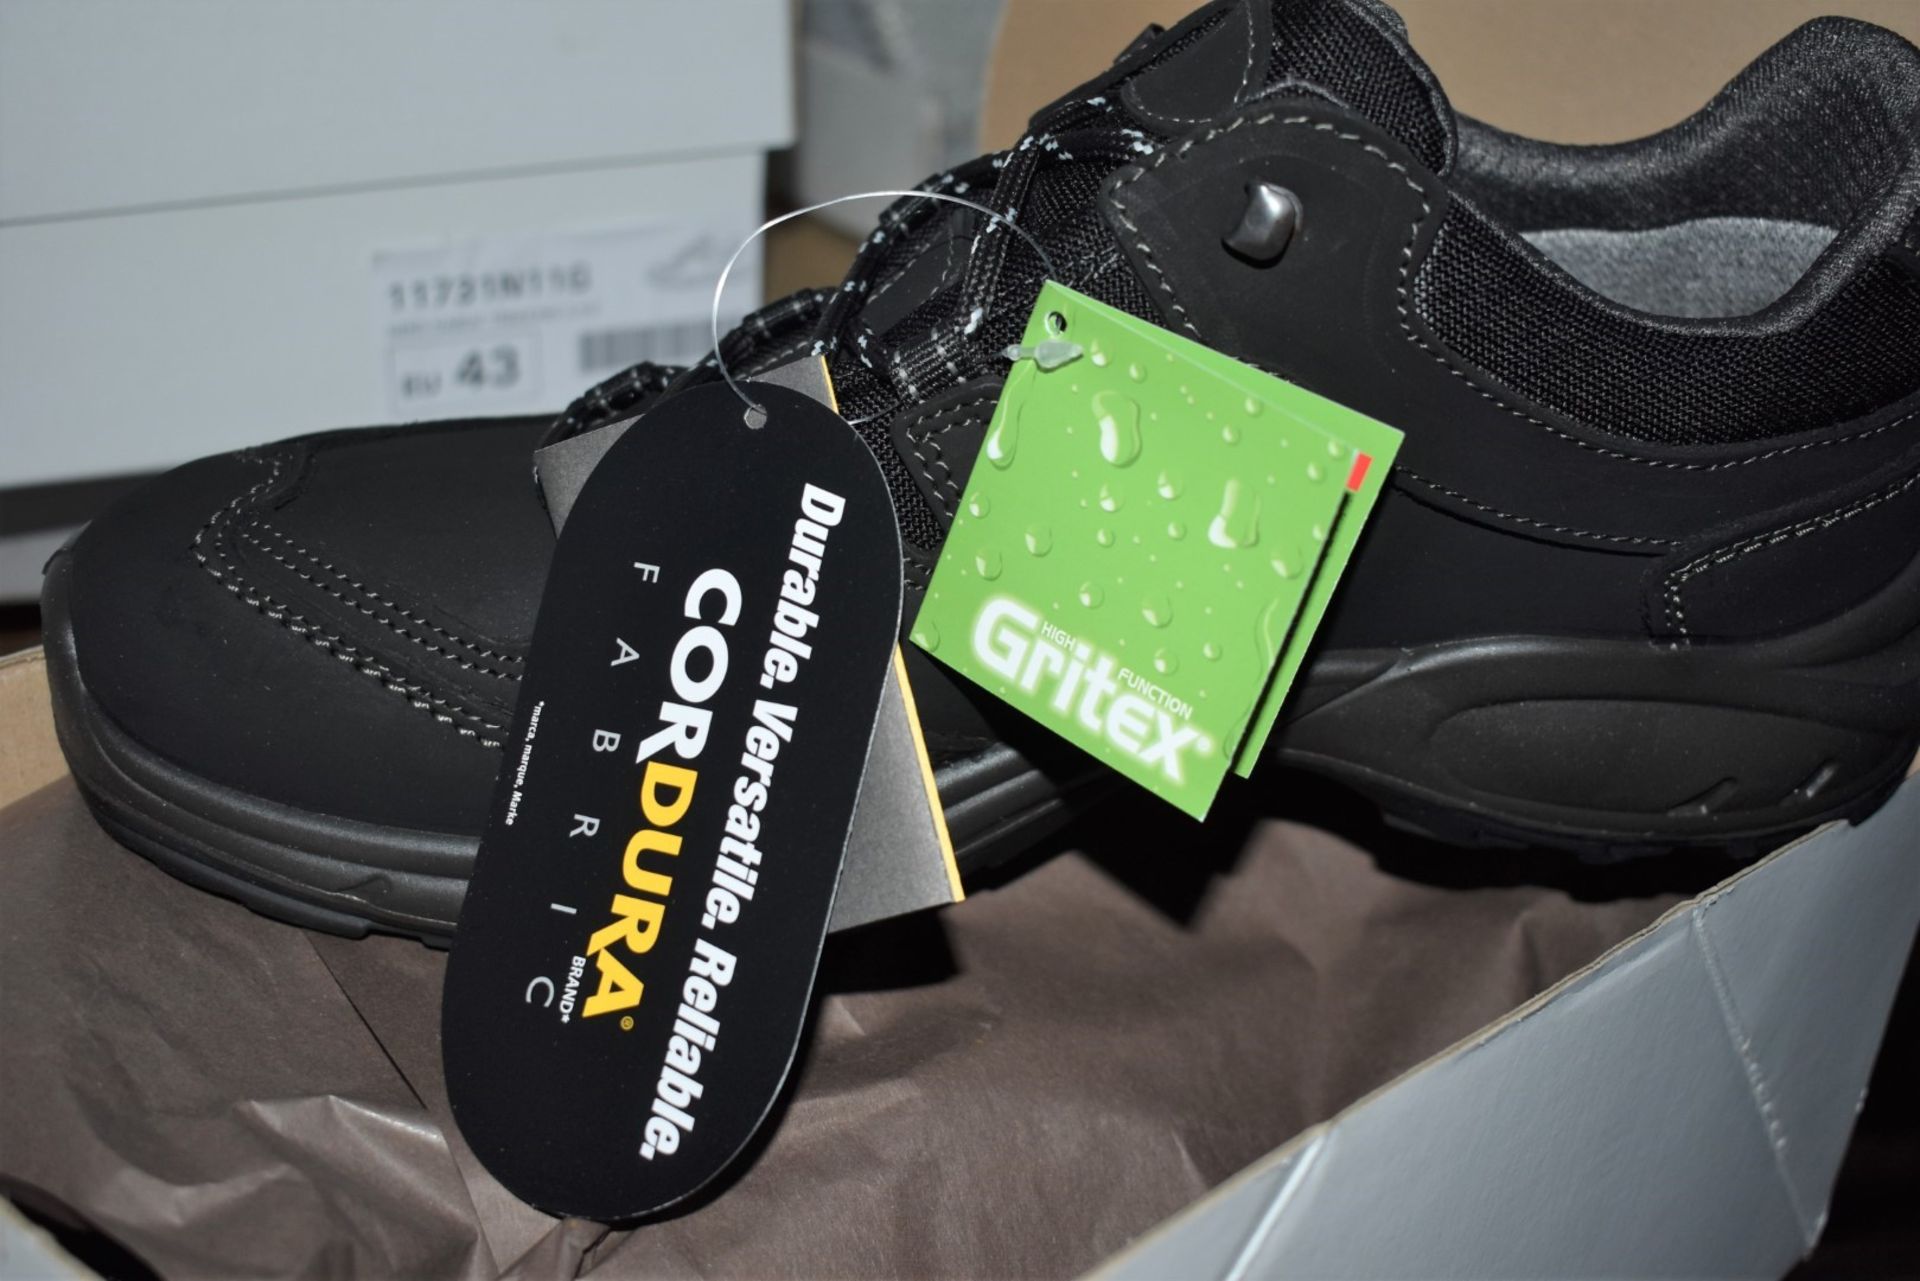 1 x Pair of Mens VIBRAM Walking Shoes - Outdoor GriTex Trekking Shoes With Cordura Fabric - Made - Image 2 of 5